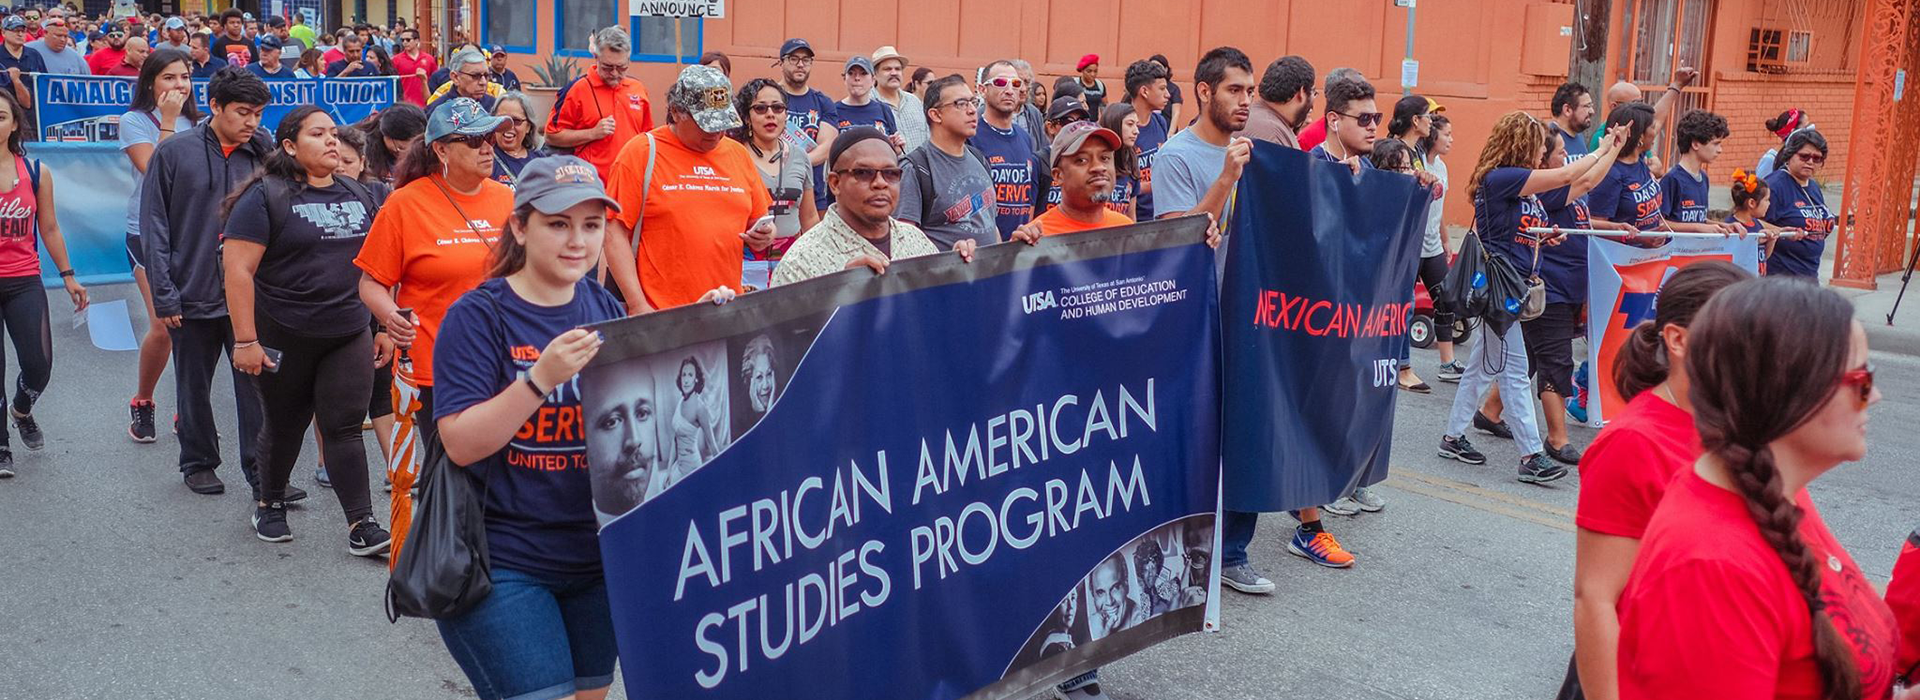 Mexican American Studies at the Chavez March in 2019